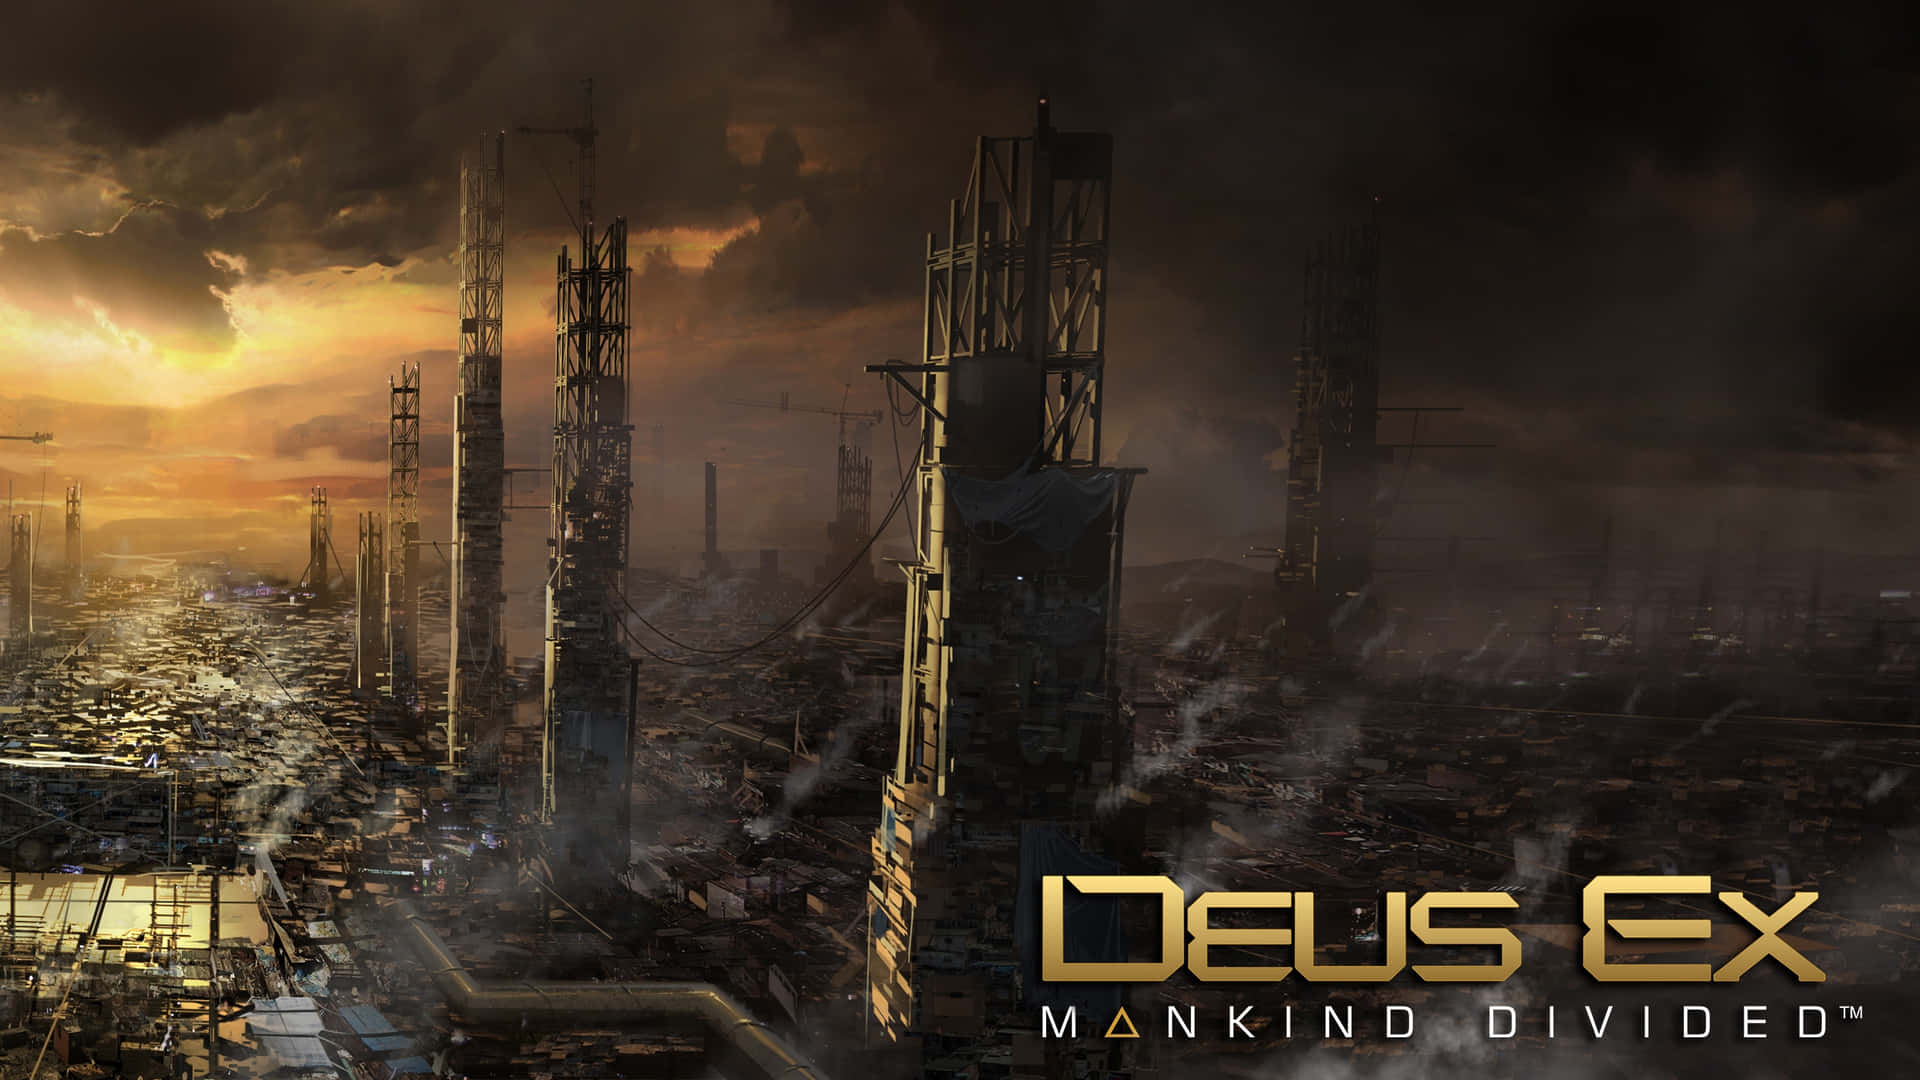 Mankind Divided - Two sides, One Humanity Wallpaper